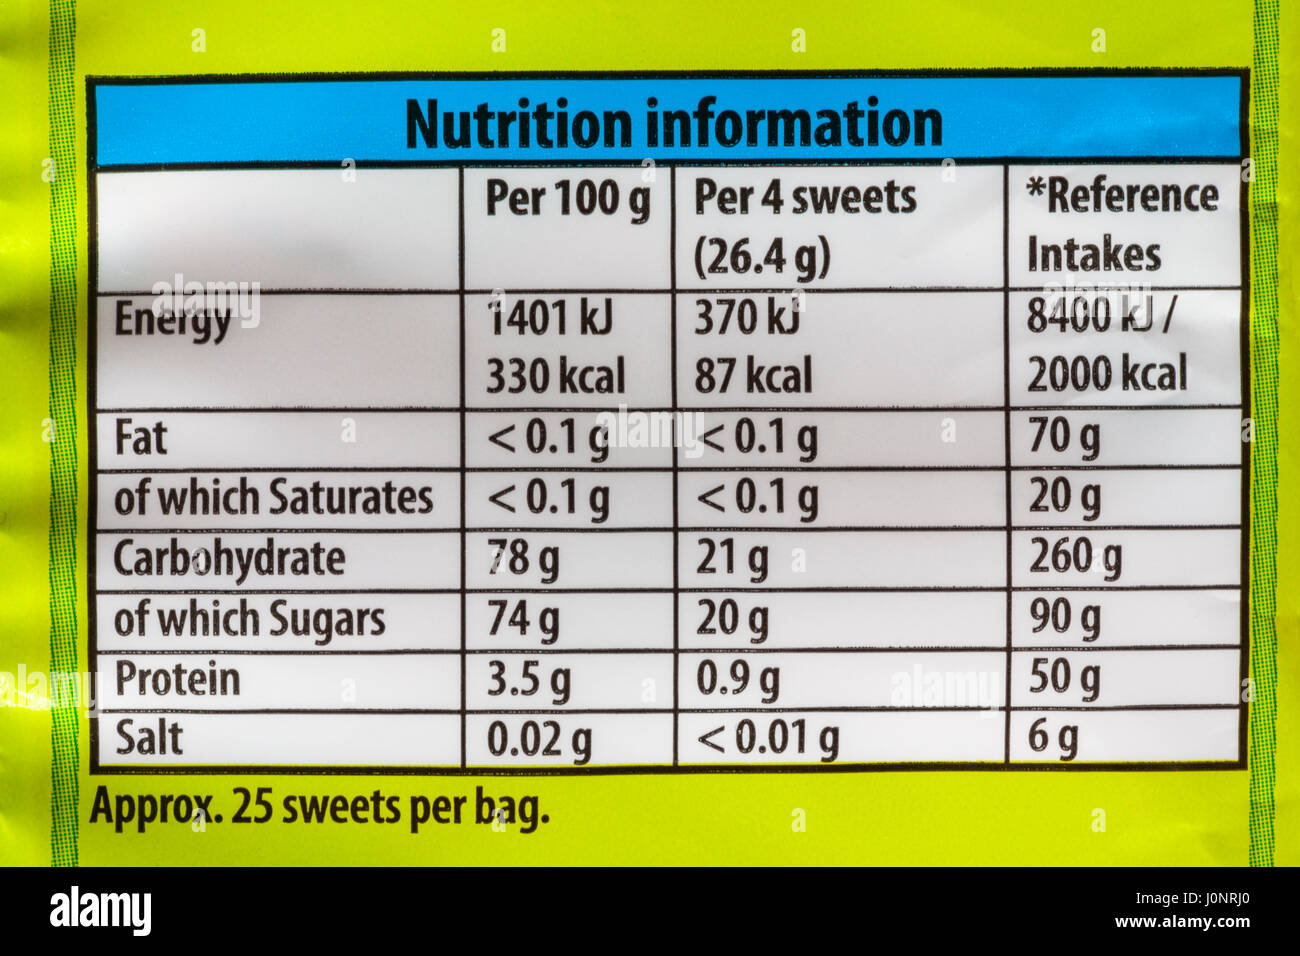 Nutritional information on pack of Maynards Bassetts Jelly Bunnies sweets Stock Photo